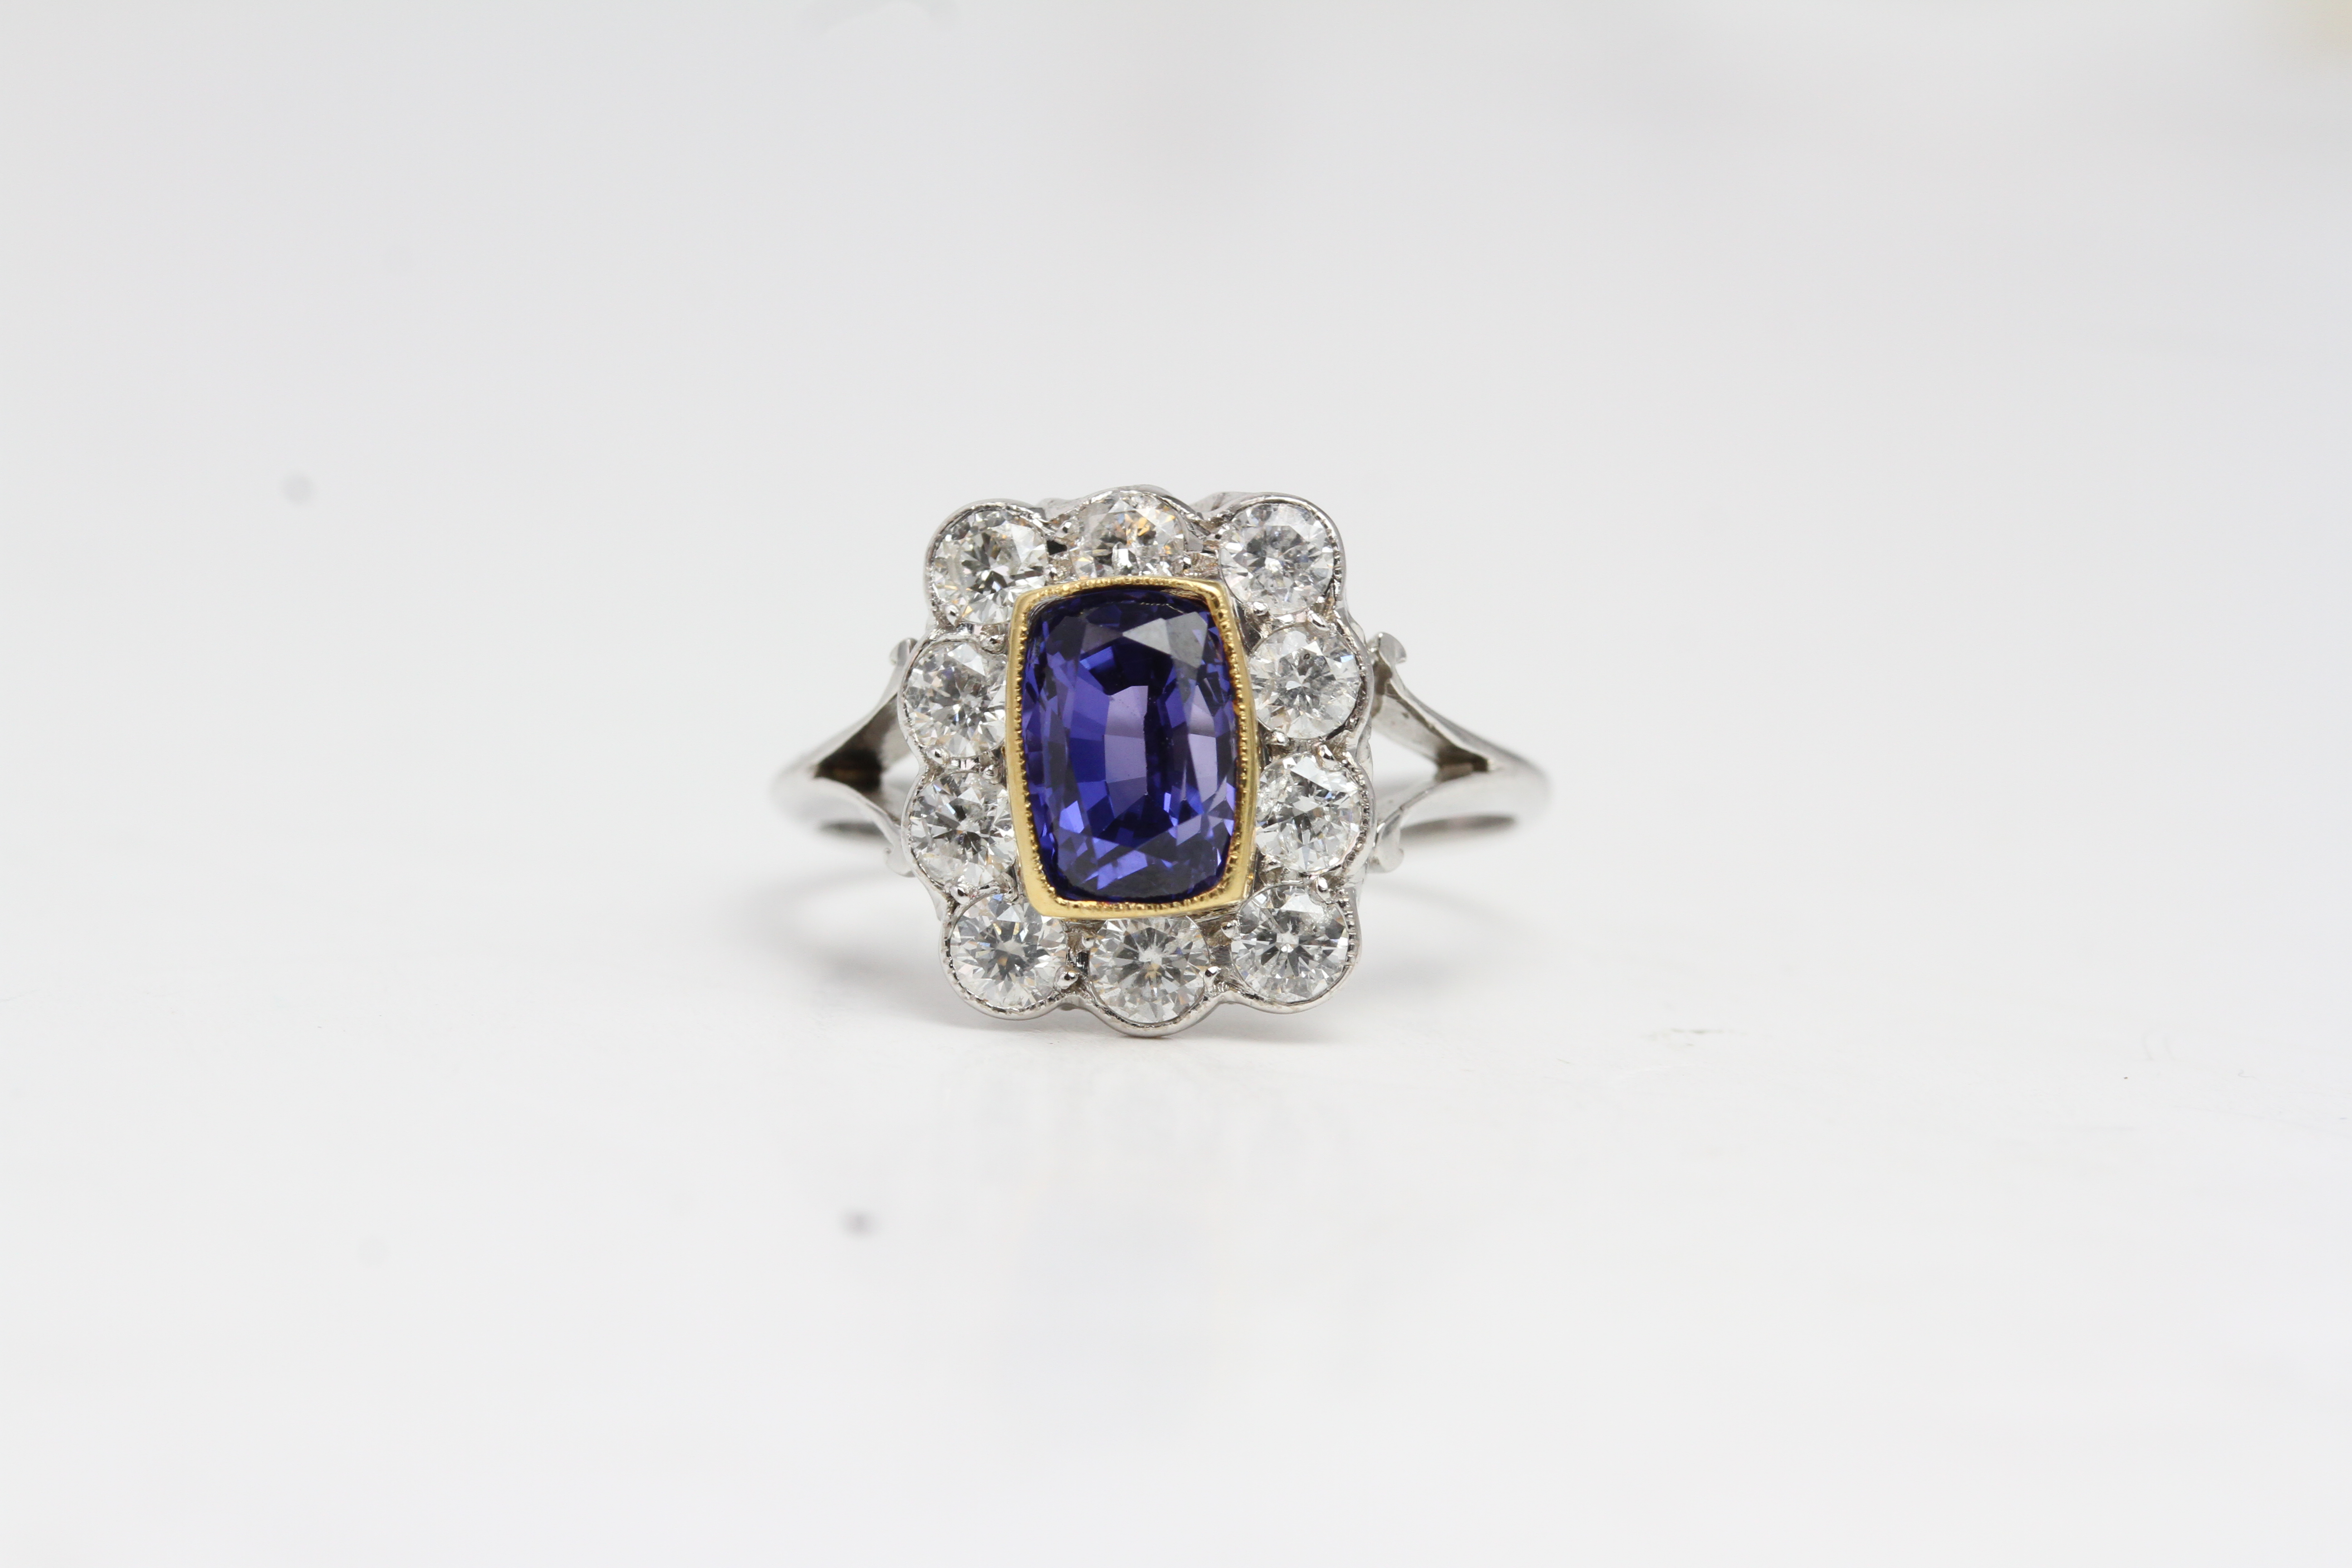 18 white gold sapphire and diamond cluster ring with split shank. The central sapphire is set in a